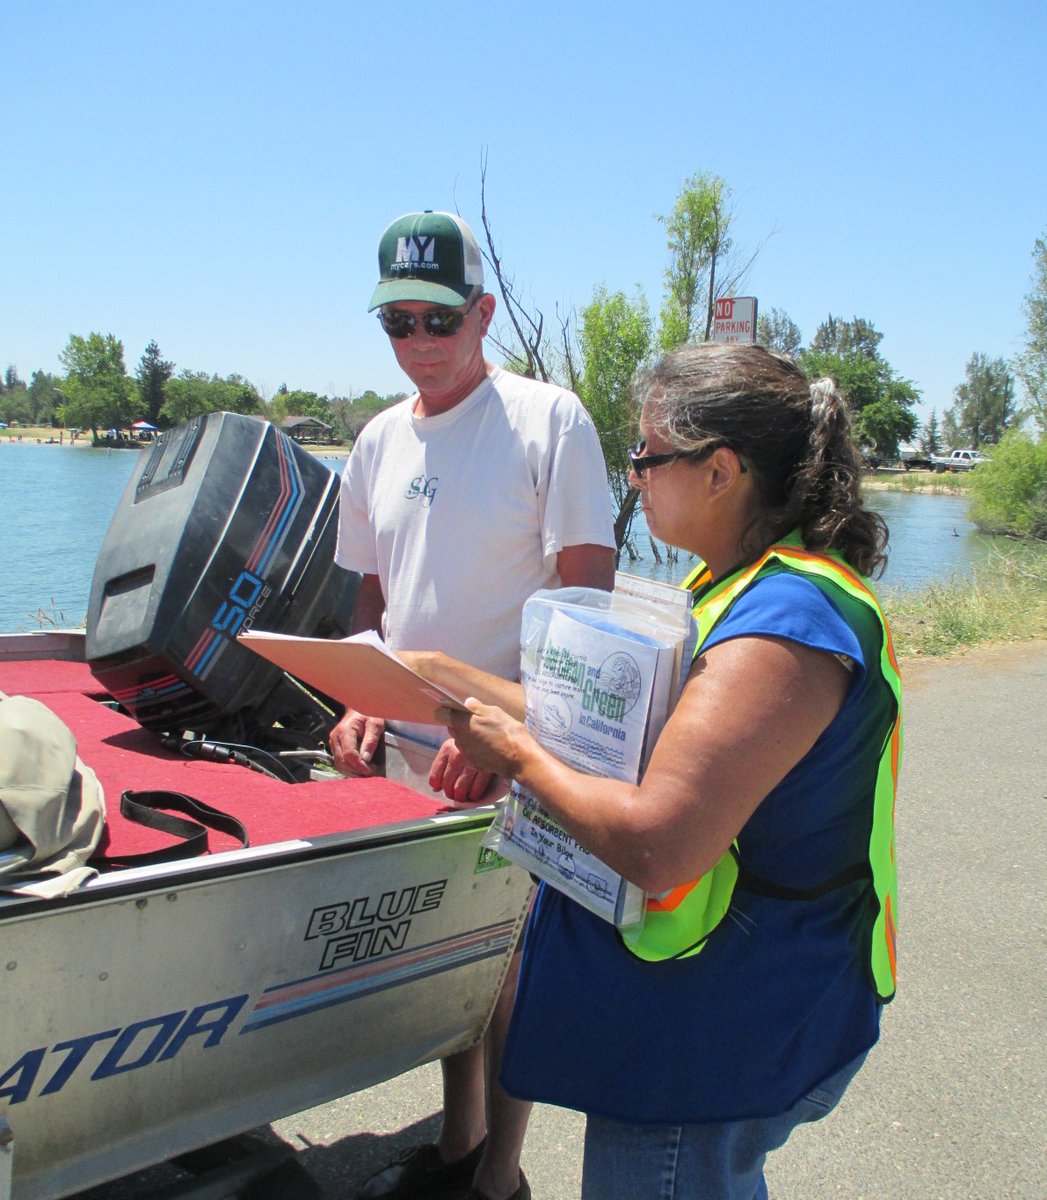 Make a difference to help keep waterways clean. Volunteer and become a partner Dockwalker! Register for our free SoCal Dockwalker in-person training at Shoreline Yacht Club on May 4th @ 10AM docs.google.com/forms/d/e/1FAI…. @TheCACoast @SMBRF @USCGAux @uspsabc